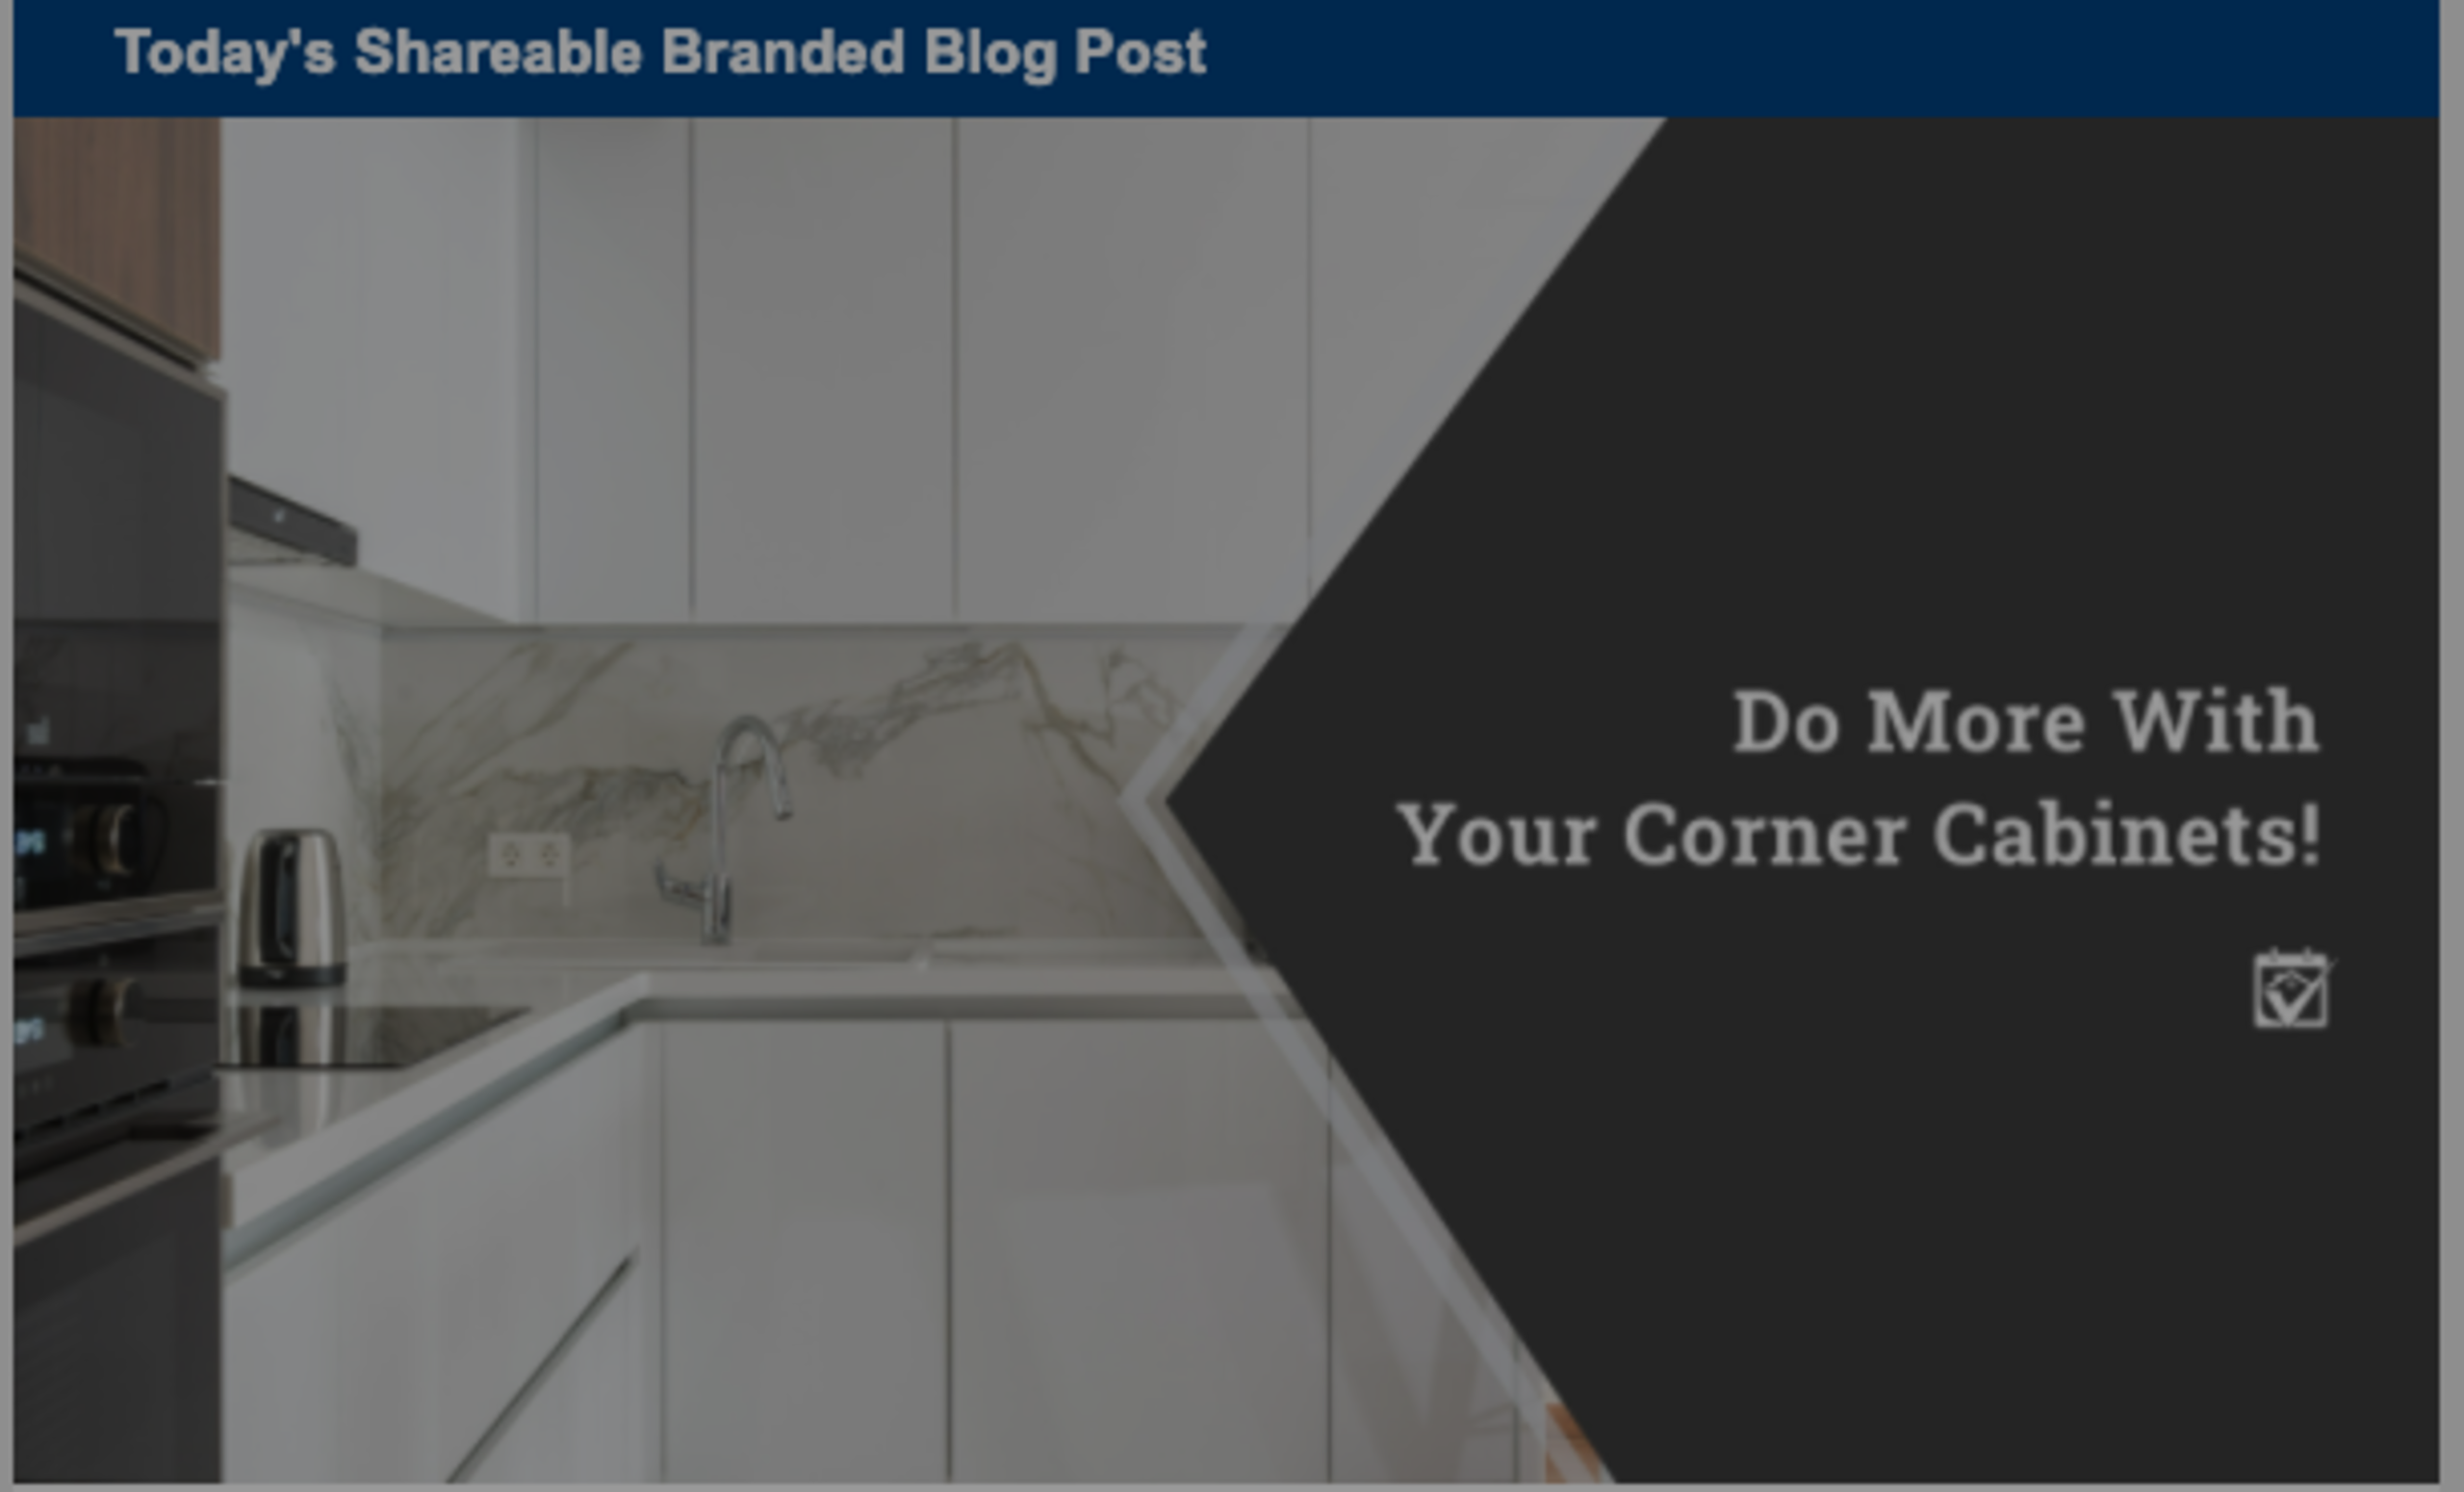 Do More With Your Corner Cabinets